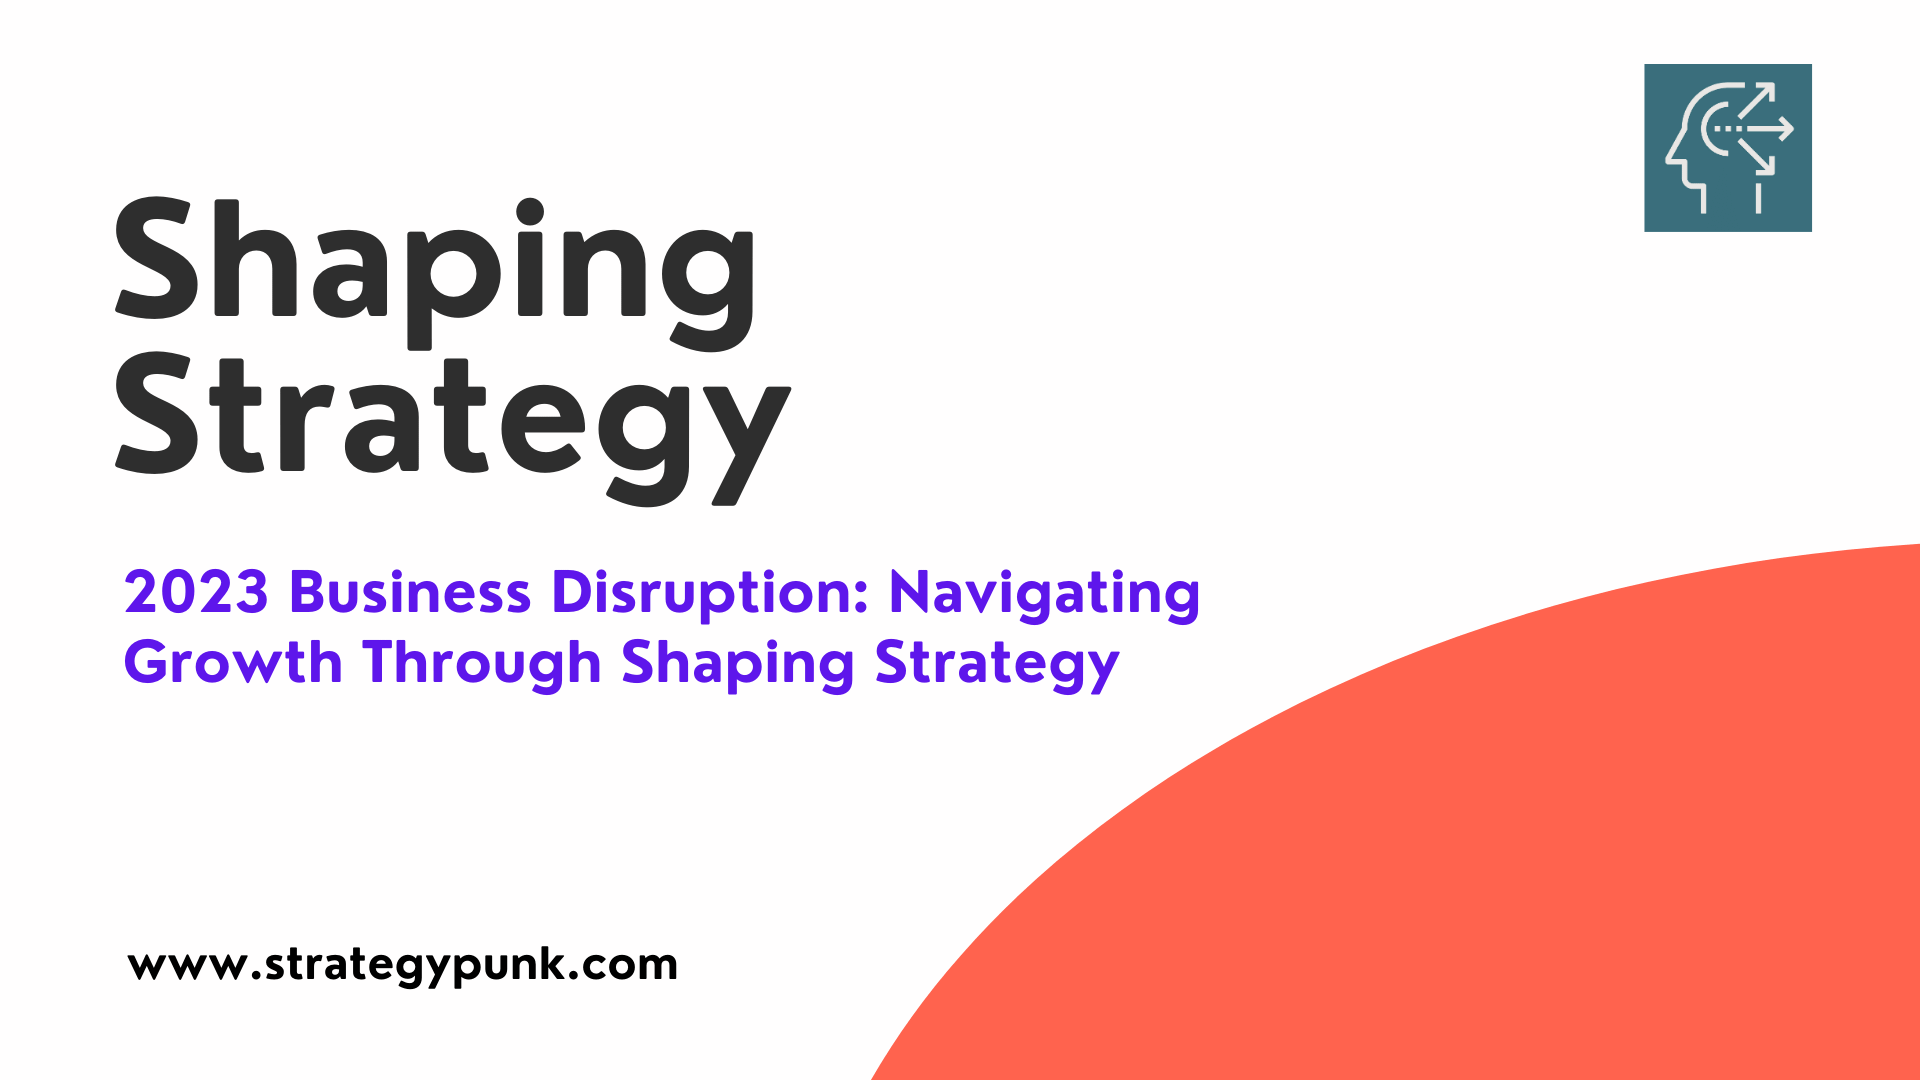 2023 Business Disruption: Navigating Growth Through Shaping Strategy